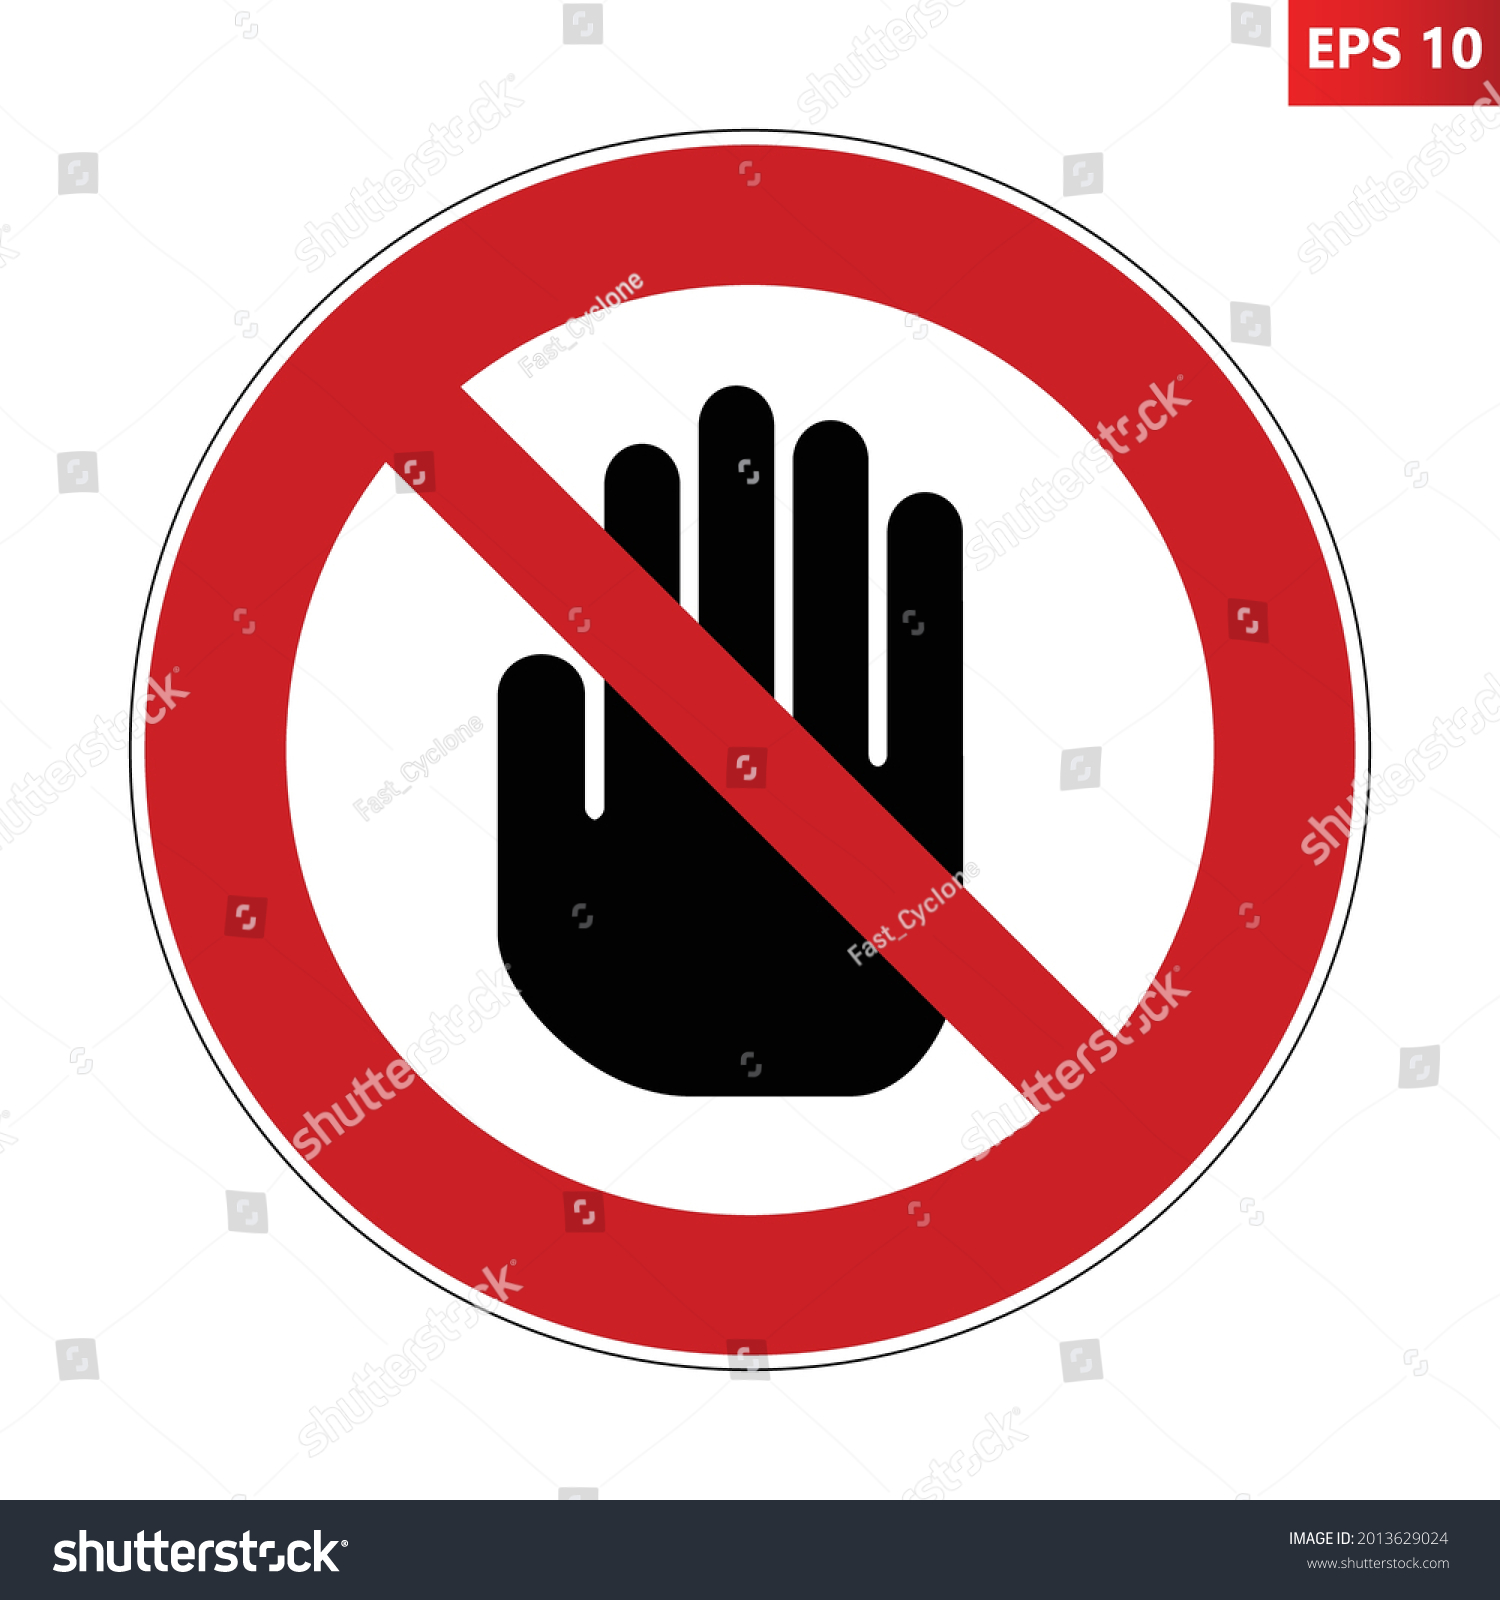 SVG of Red crossed out circle sign with big black hand icon inside. Vector illustration of prohibition traffic sign. Absolute stop symbol for any purpose. Access denied. Do not enter. svg